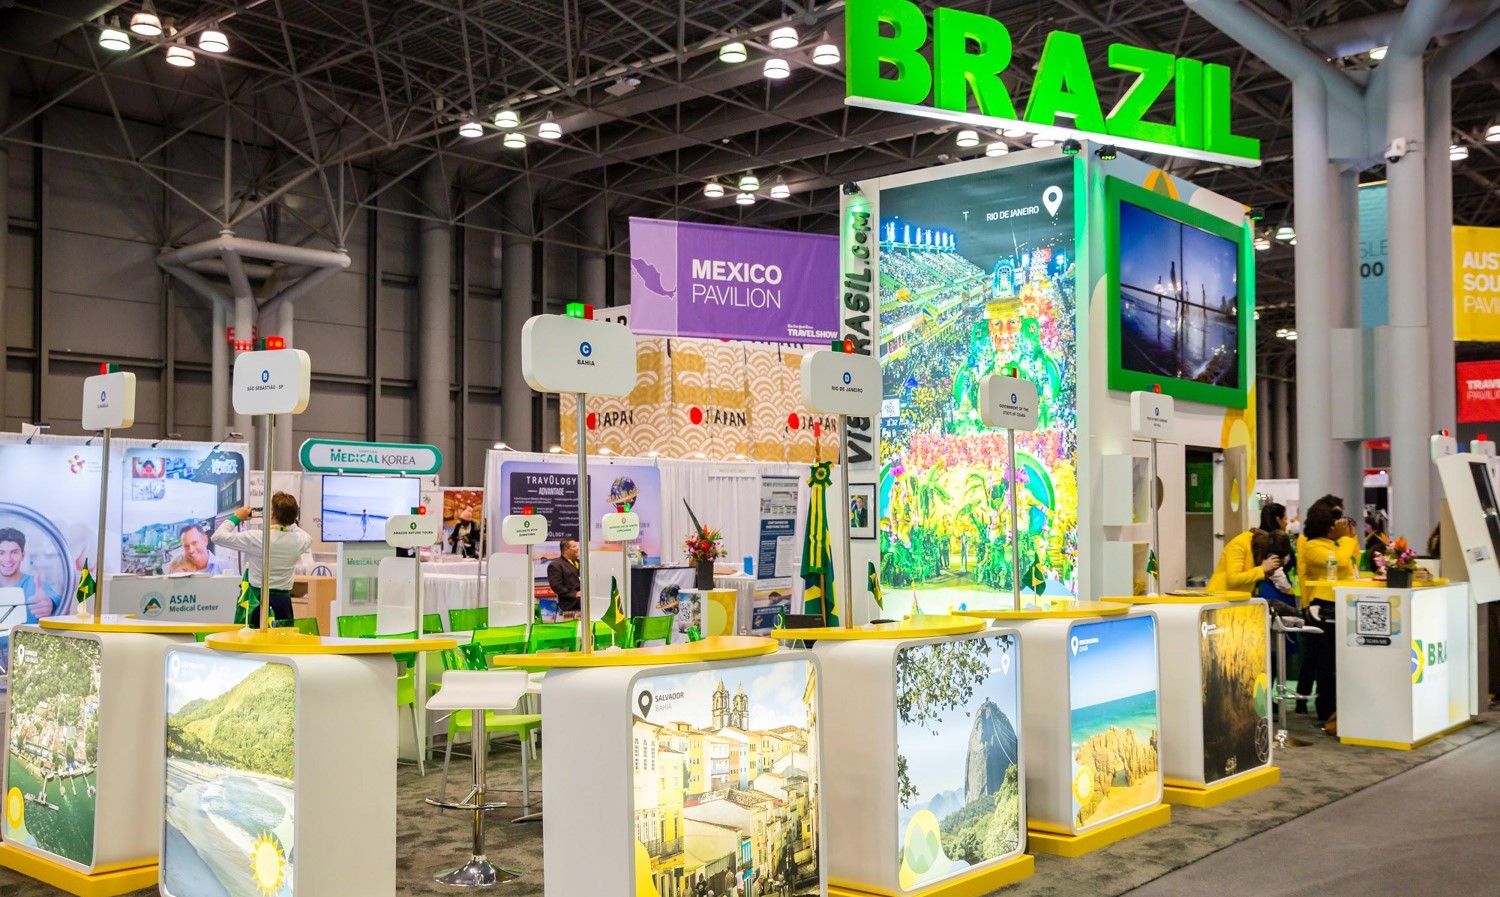 THE NEW YORK TIMES TRAVEL SHOW